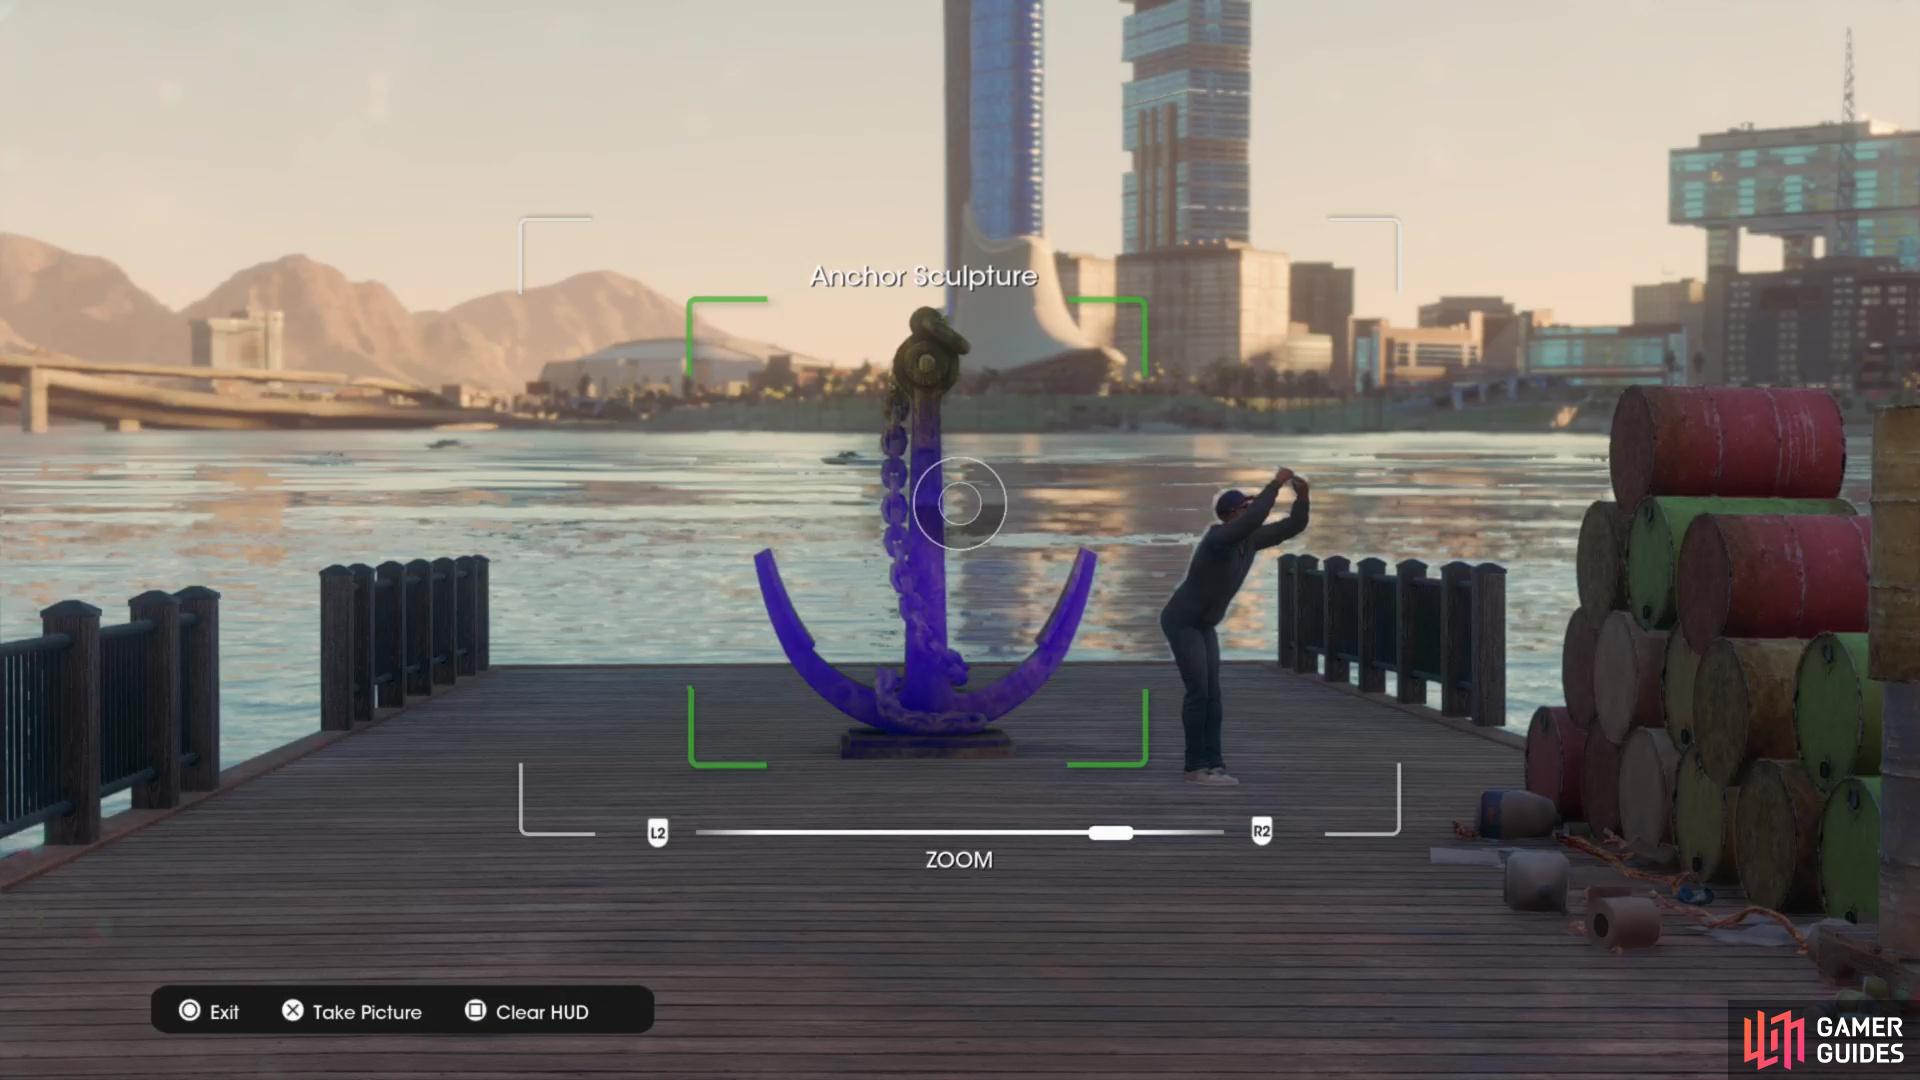 Take a picture of the "Anchor Sculpture" collectible to obtain it.